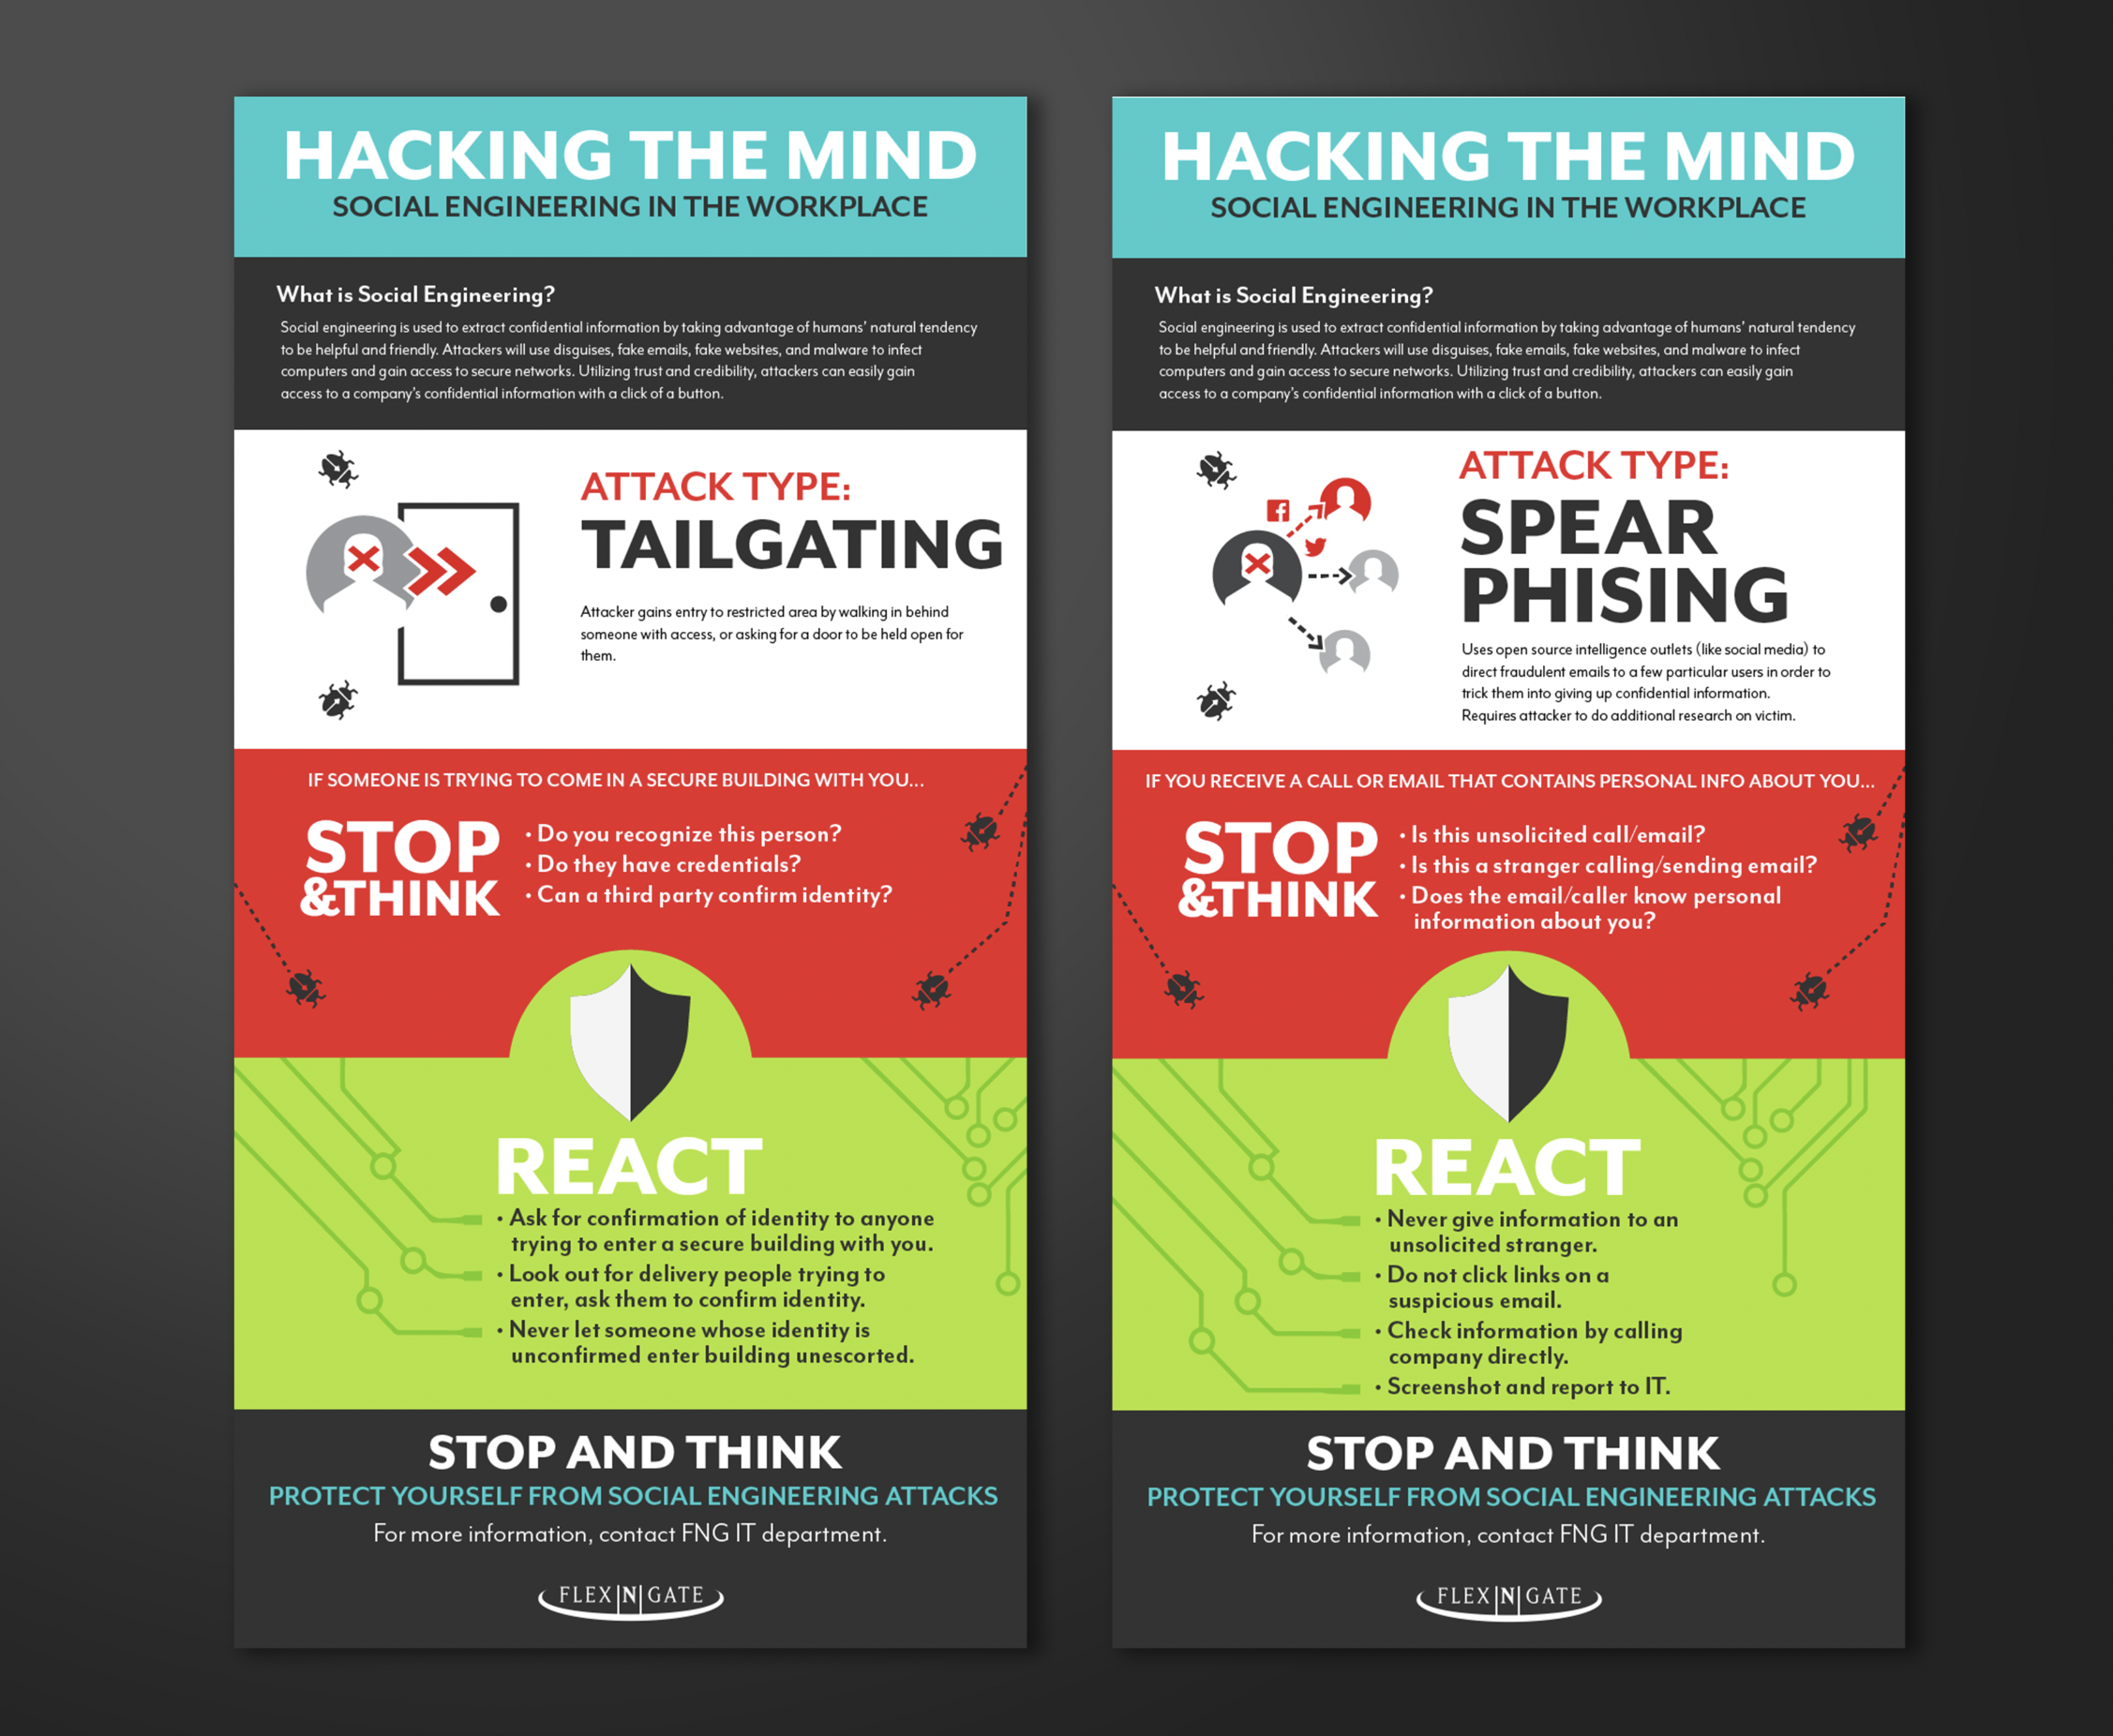 IT and Corporate Security: Social Engineering Email/Flyer Campaign